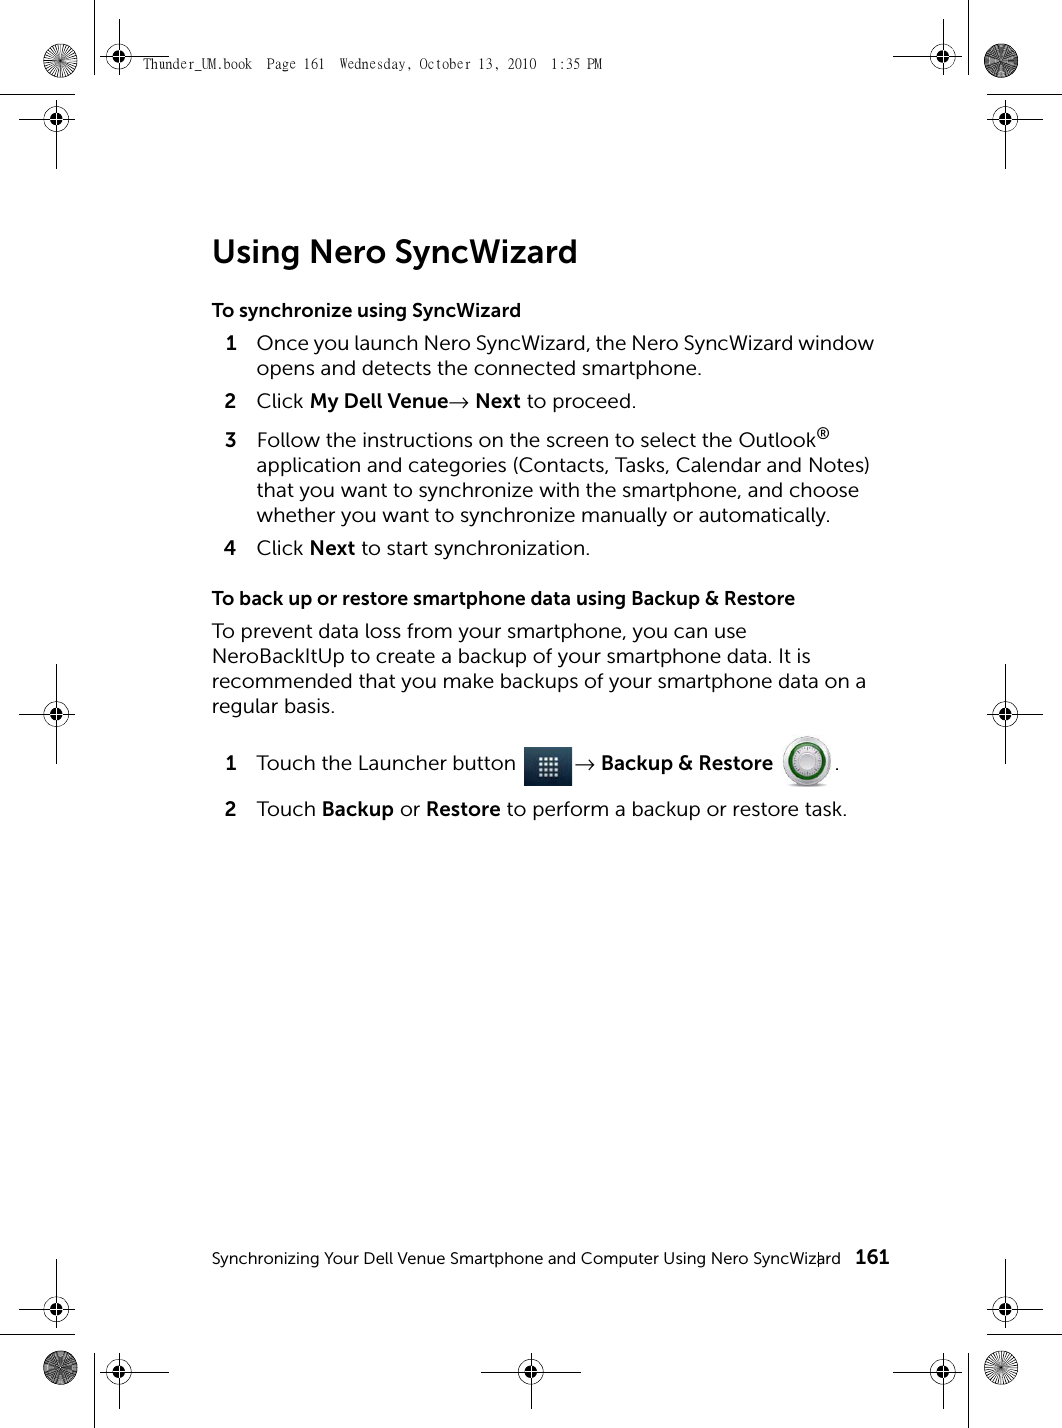 Synchronizing Your Dell Venue Smartphone and Computer Using Nero SyncWizard 161Using Nero SyncWizardTo synchronize using SyncWizard1Once you launch Nero SyncWizard, the Nero SyncWizard window opens and detects the connected smartphone.2Click My Dell Venue→ Next to proceed.3Follow the instructions on the screen to select the Outlook® application and categories (Contacts, Tasks, Calendar and Notes) that you want to synchronize with the smartphone, and choose whether you want to synchronize manually or automatically.4Click Next to start synchronization.To back up or restore smartphone data using Backup &amp; RestoreTo prevent data loss from your smartphone, you can use NeroBackItUp to create a backup of your smartphone data. It is recommended that you make backups of your smartphone data on a regular basis.1Touch the Launcher button  → Backup &amp; Restore .2Touch  Backup or Restore to perform a backup or restore task.Thunder_UM.book  Page 161  Wednesday, October 13, 2010  1:35 PM